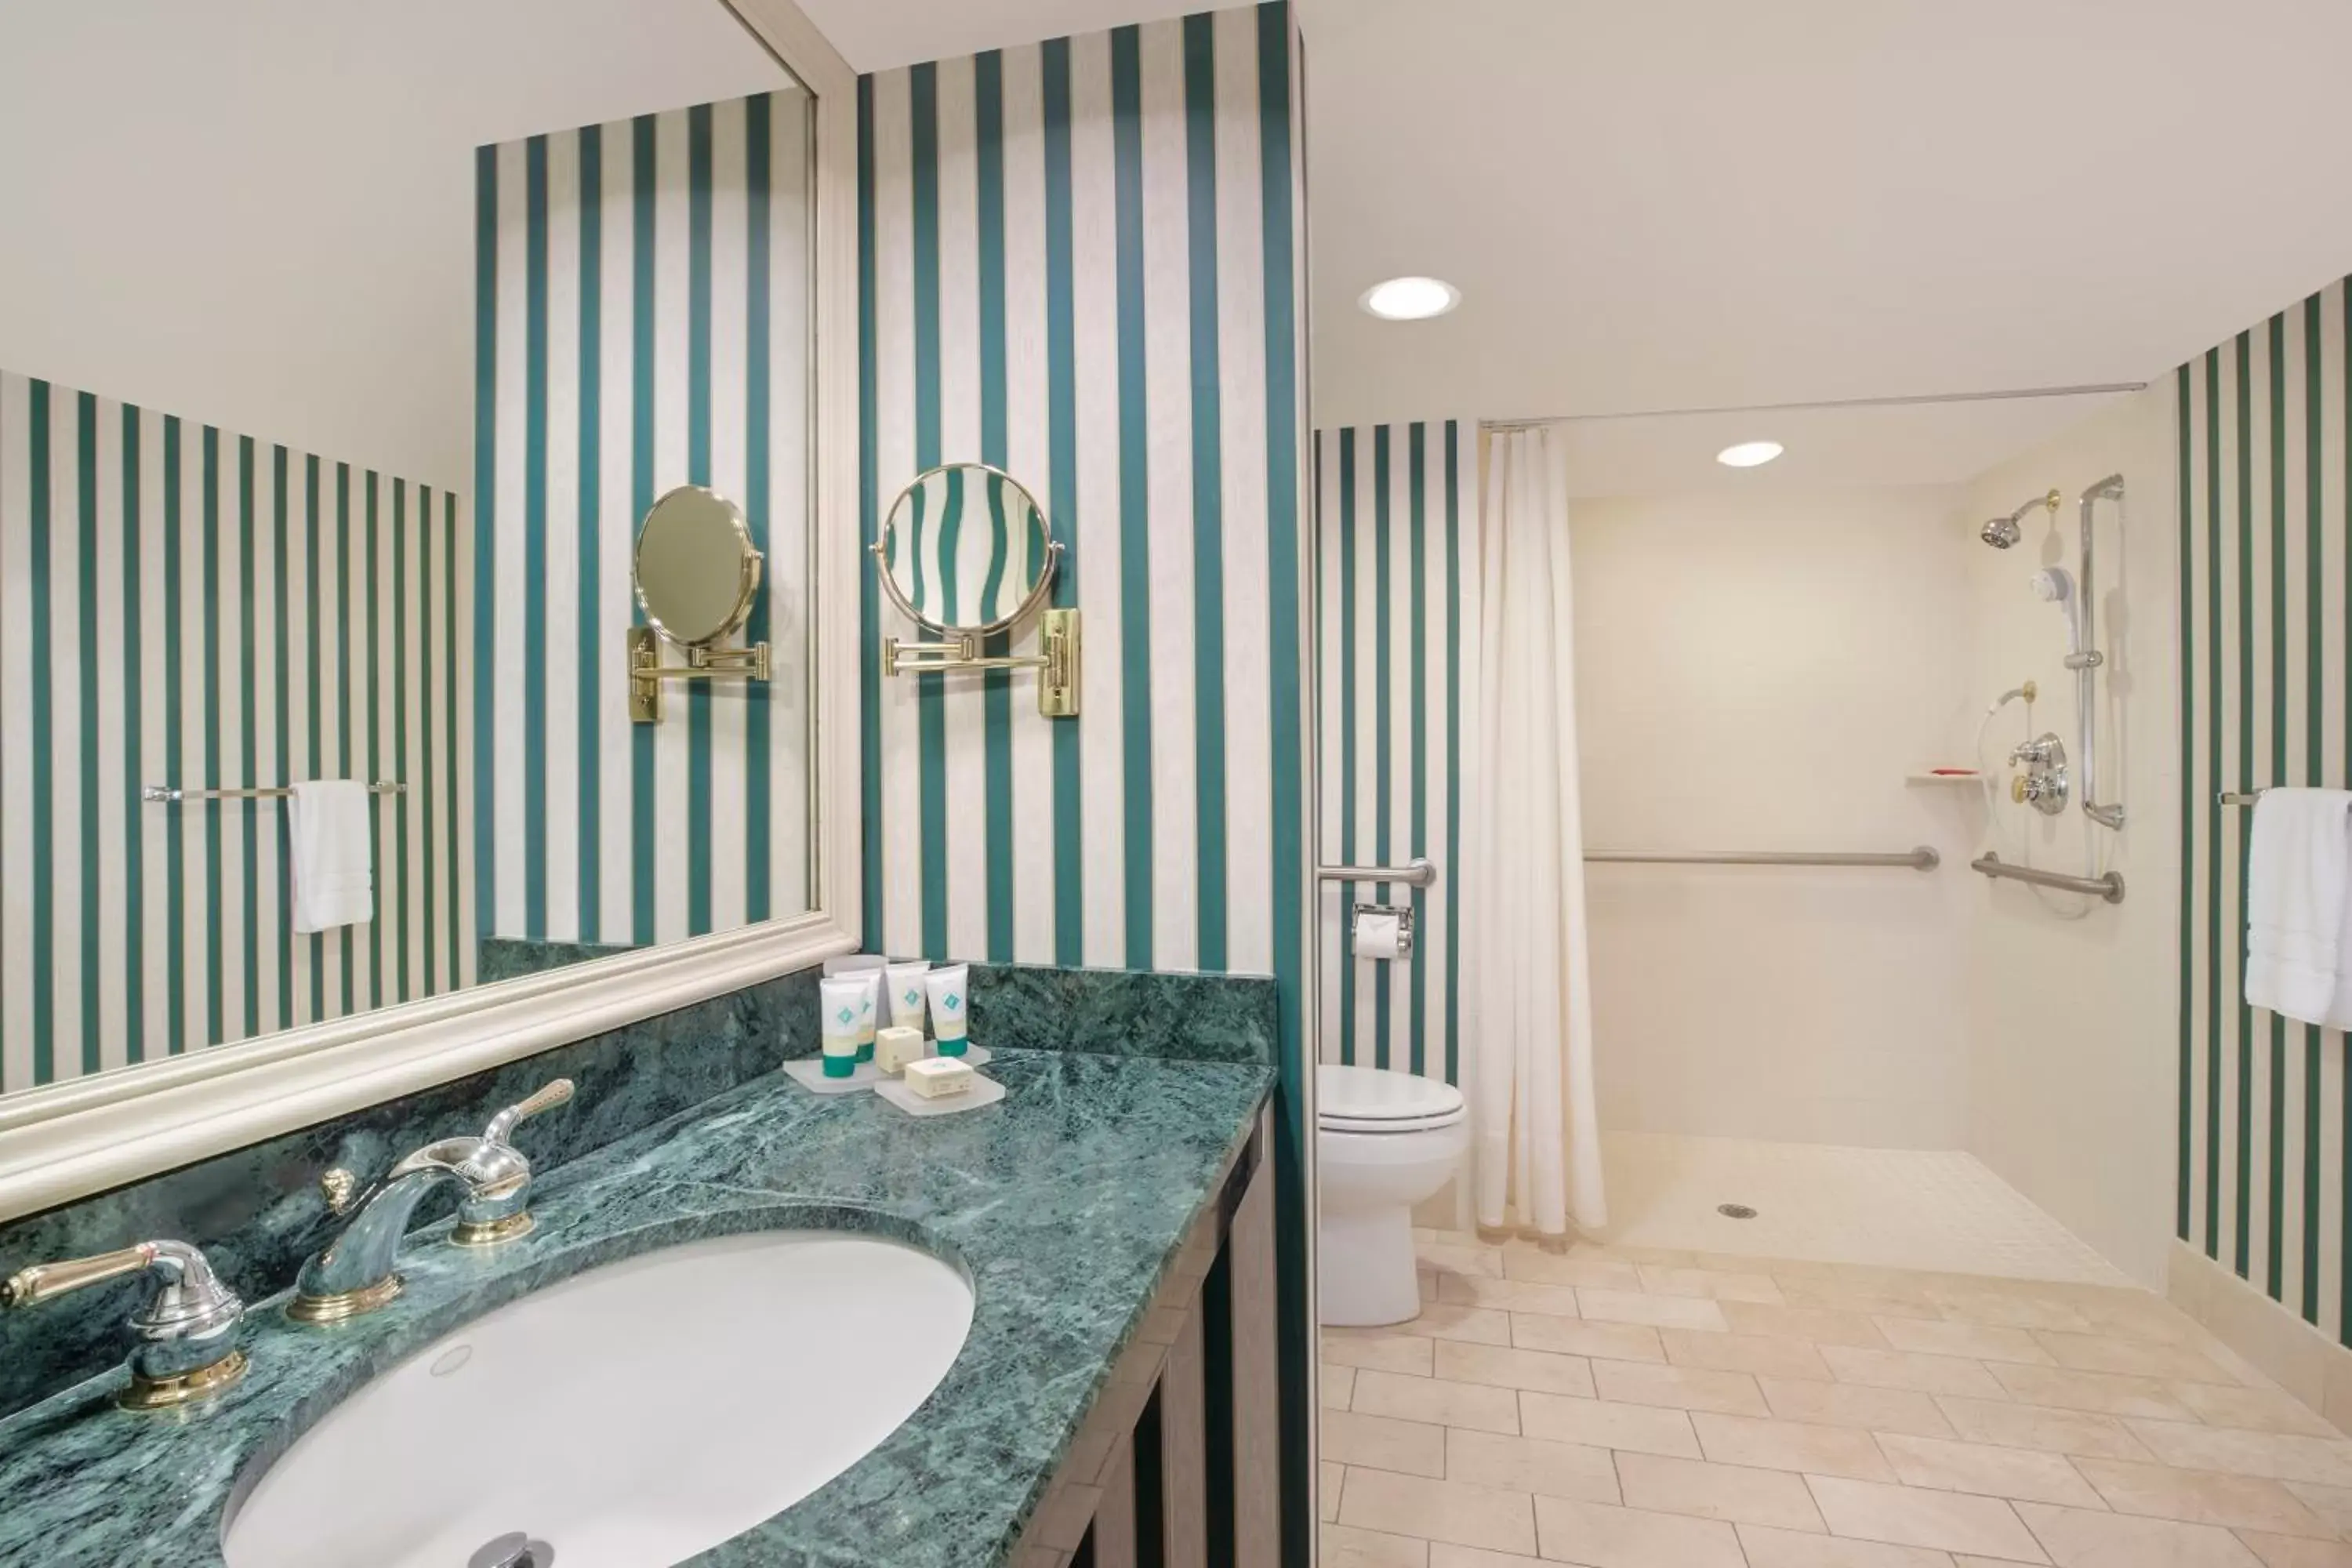 Facility for disabled guests, Bathroom in Saddlebrook Golf Resort & Spa Tampa North-Wesley Chapel